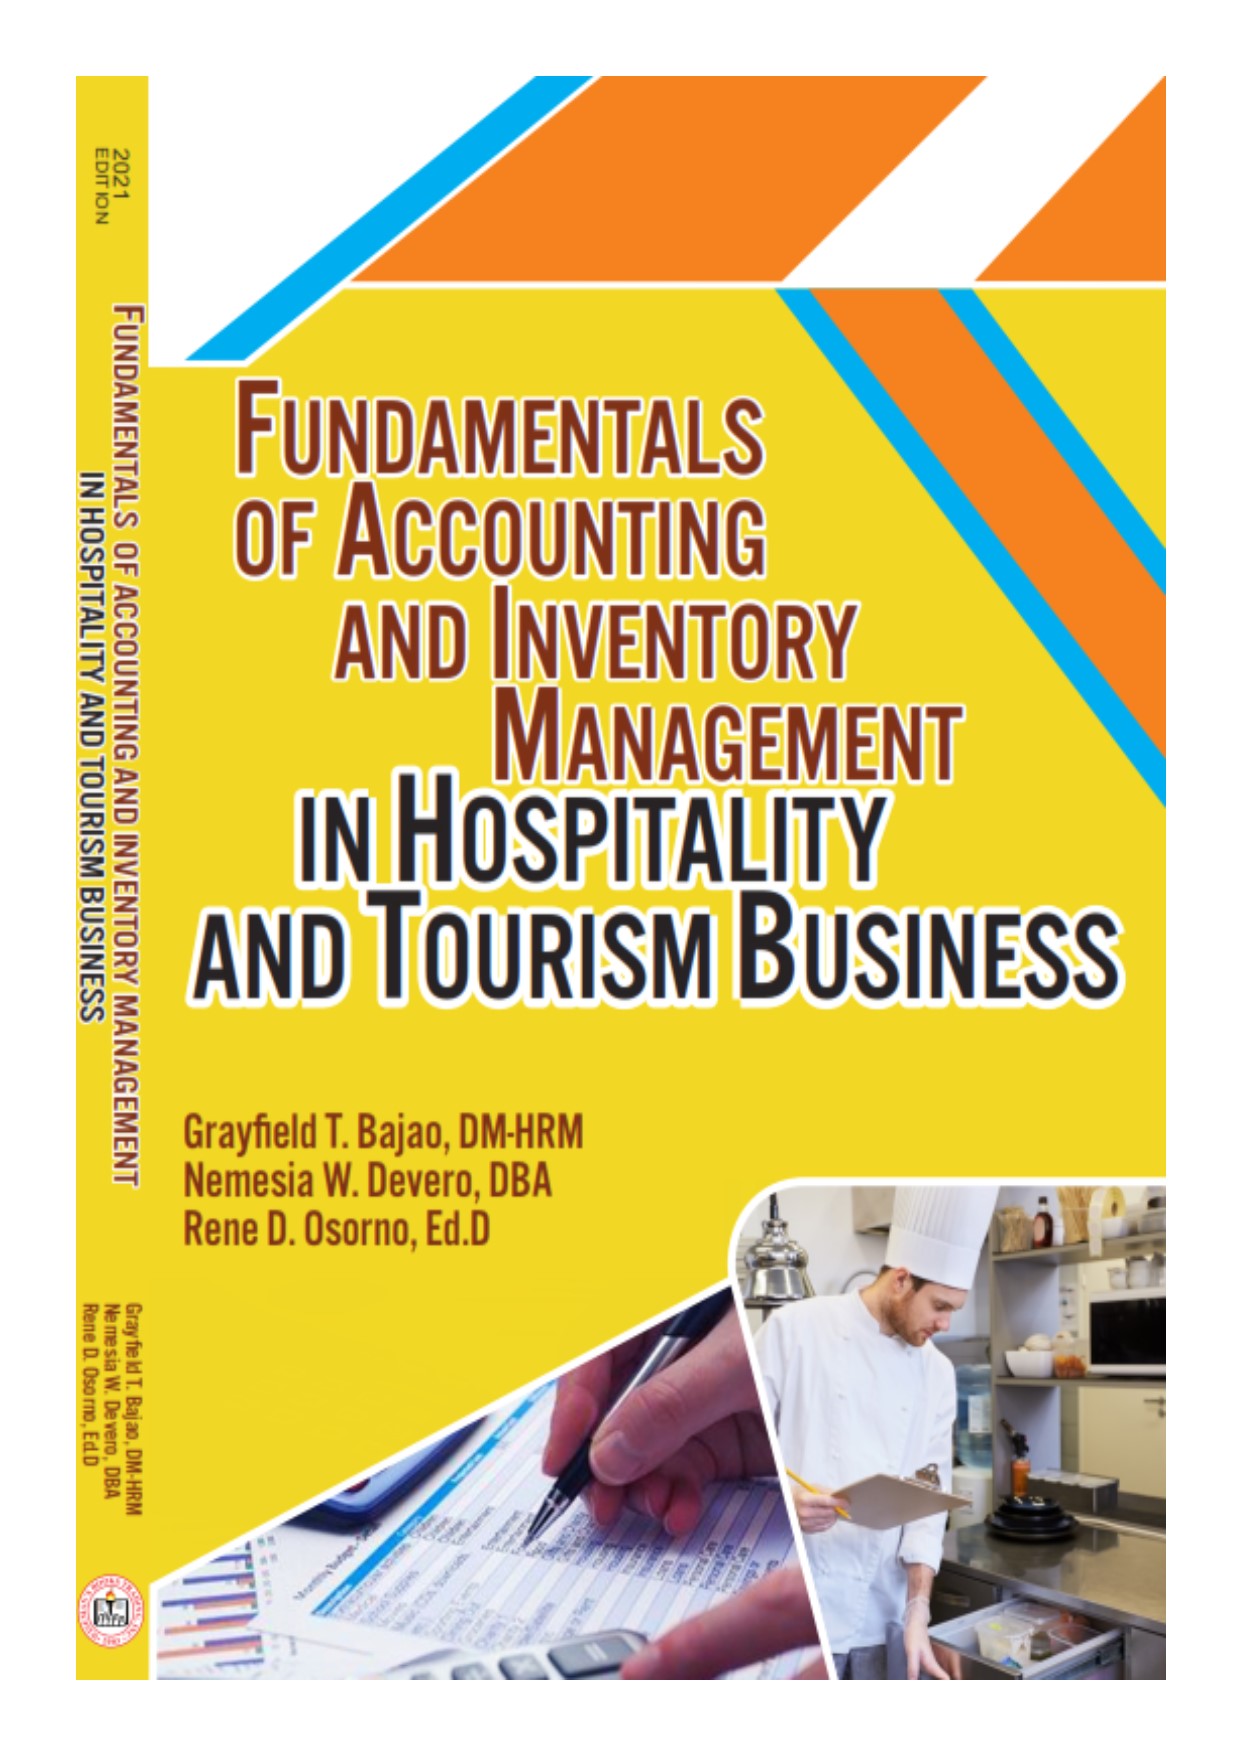 Fundamentals of accounting and inventory management in hospitality and tourism business